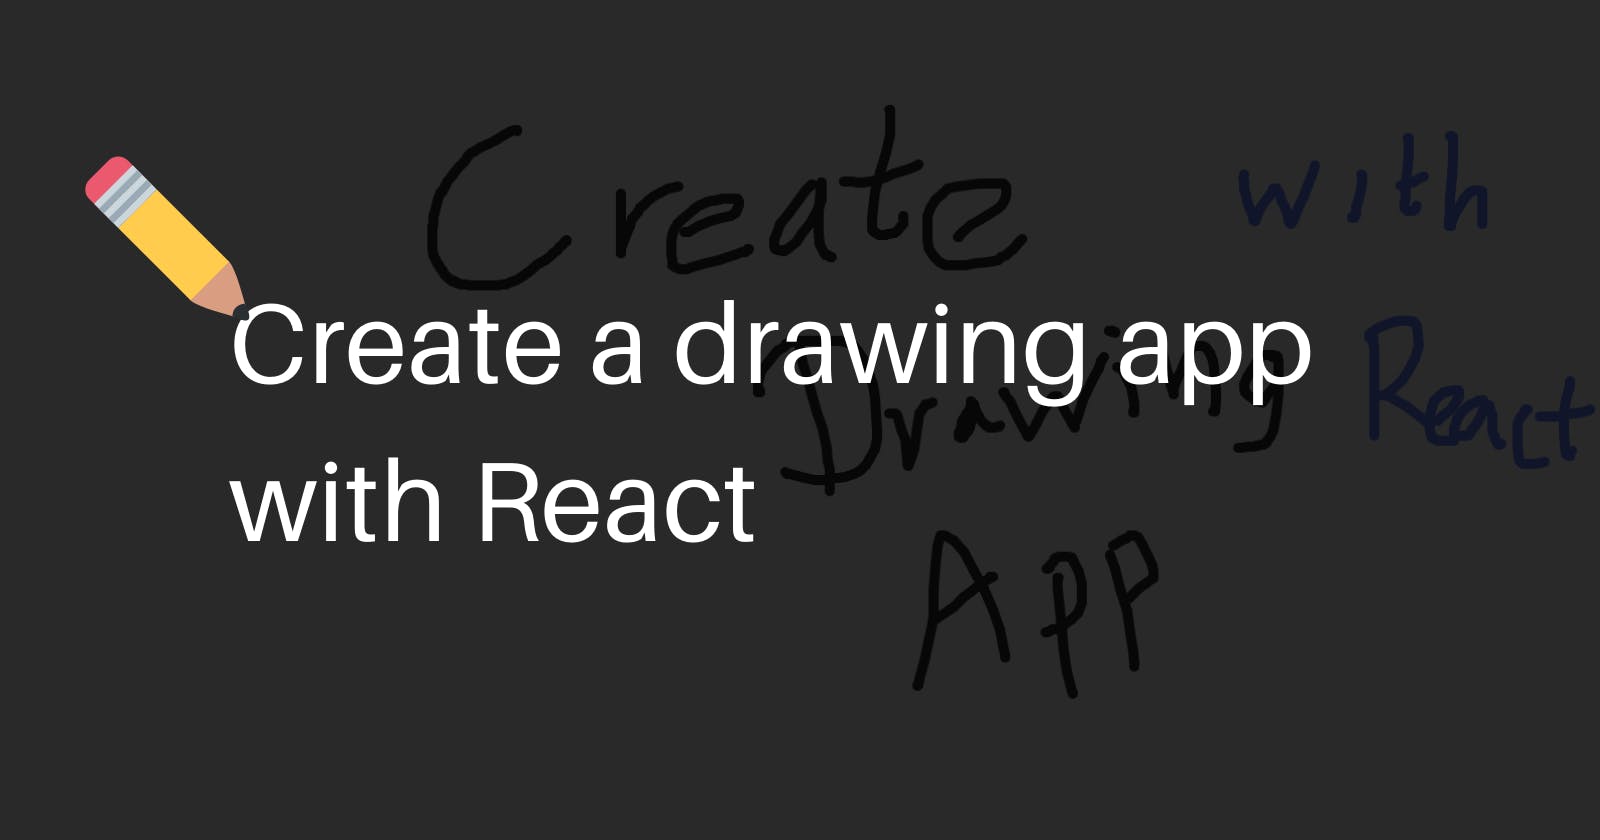 How to create a drawing app with React